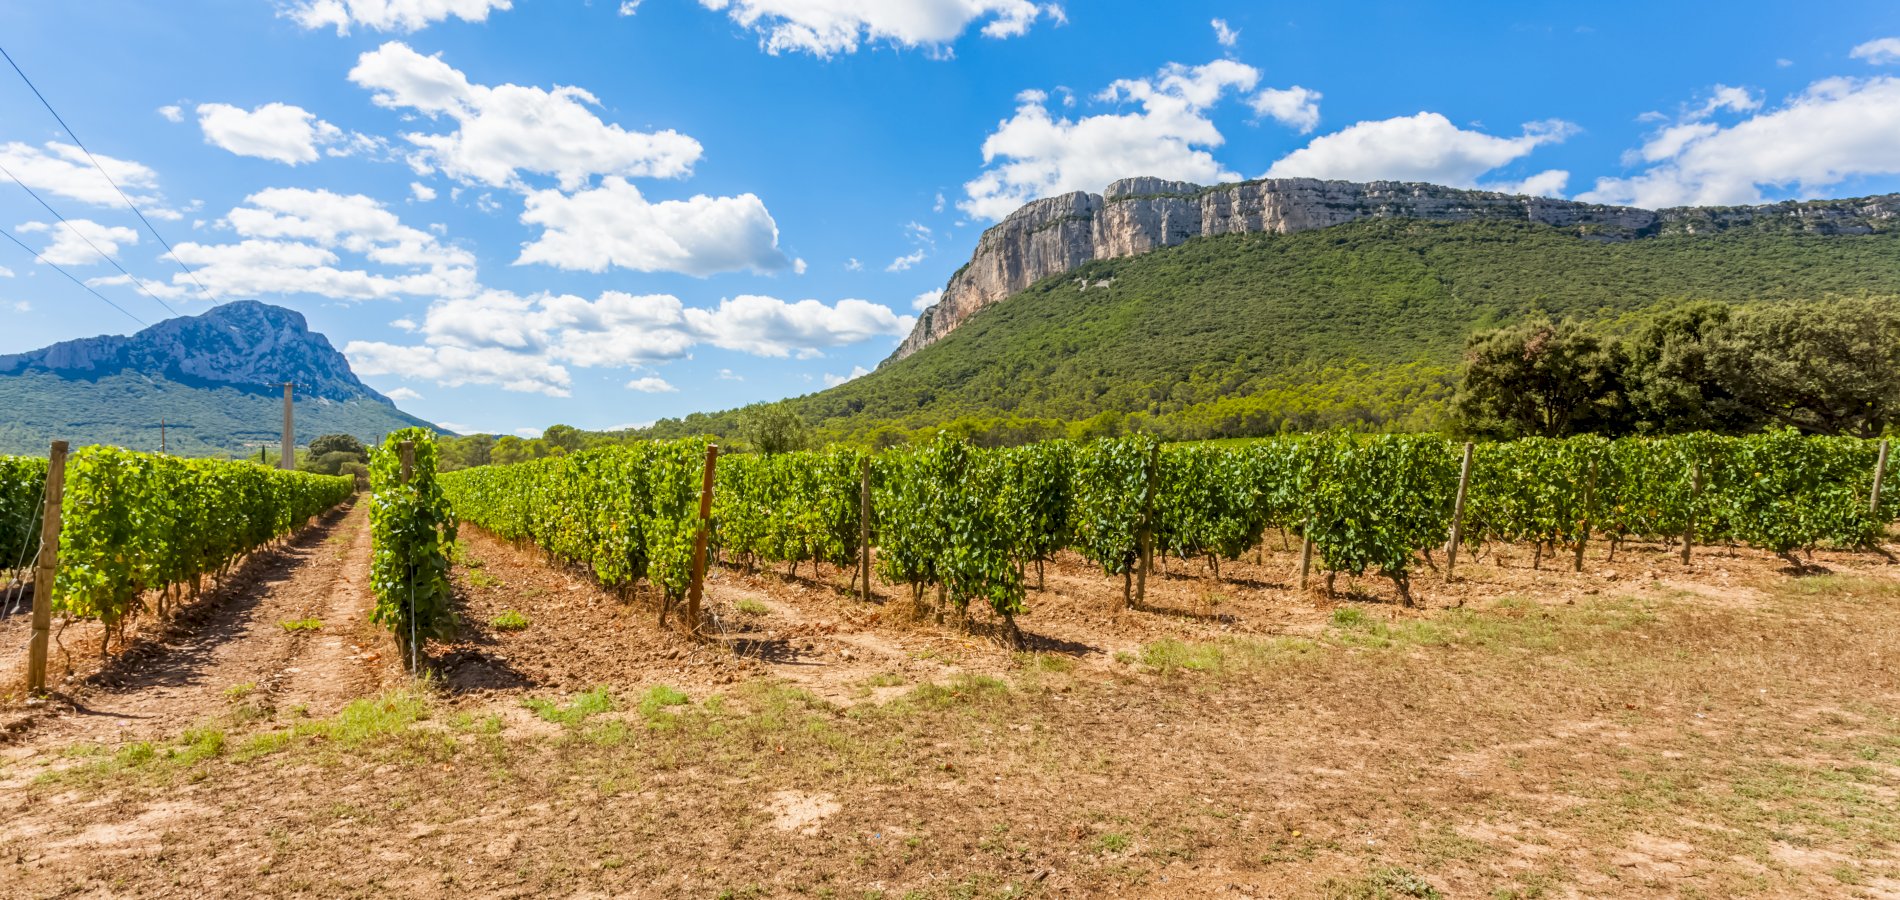 Ophorus Tours - Languedoc Wine Tour & Oyster Tasting Shared Half Day Trip from Montpellier